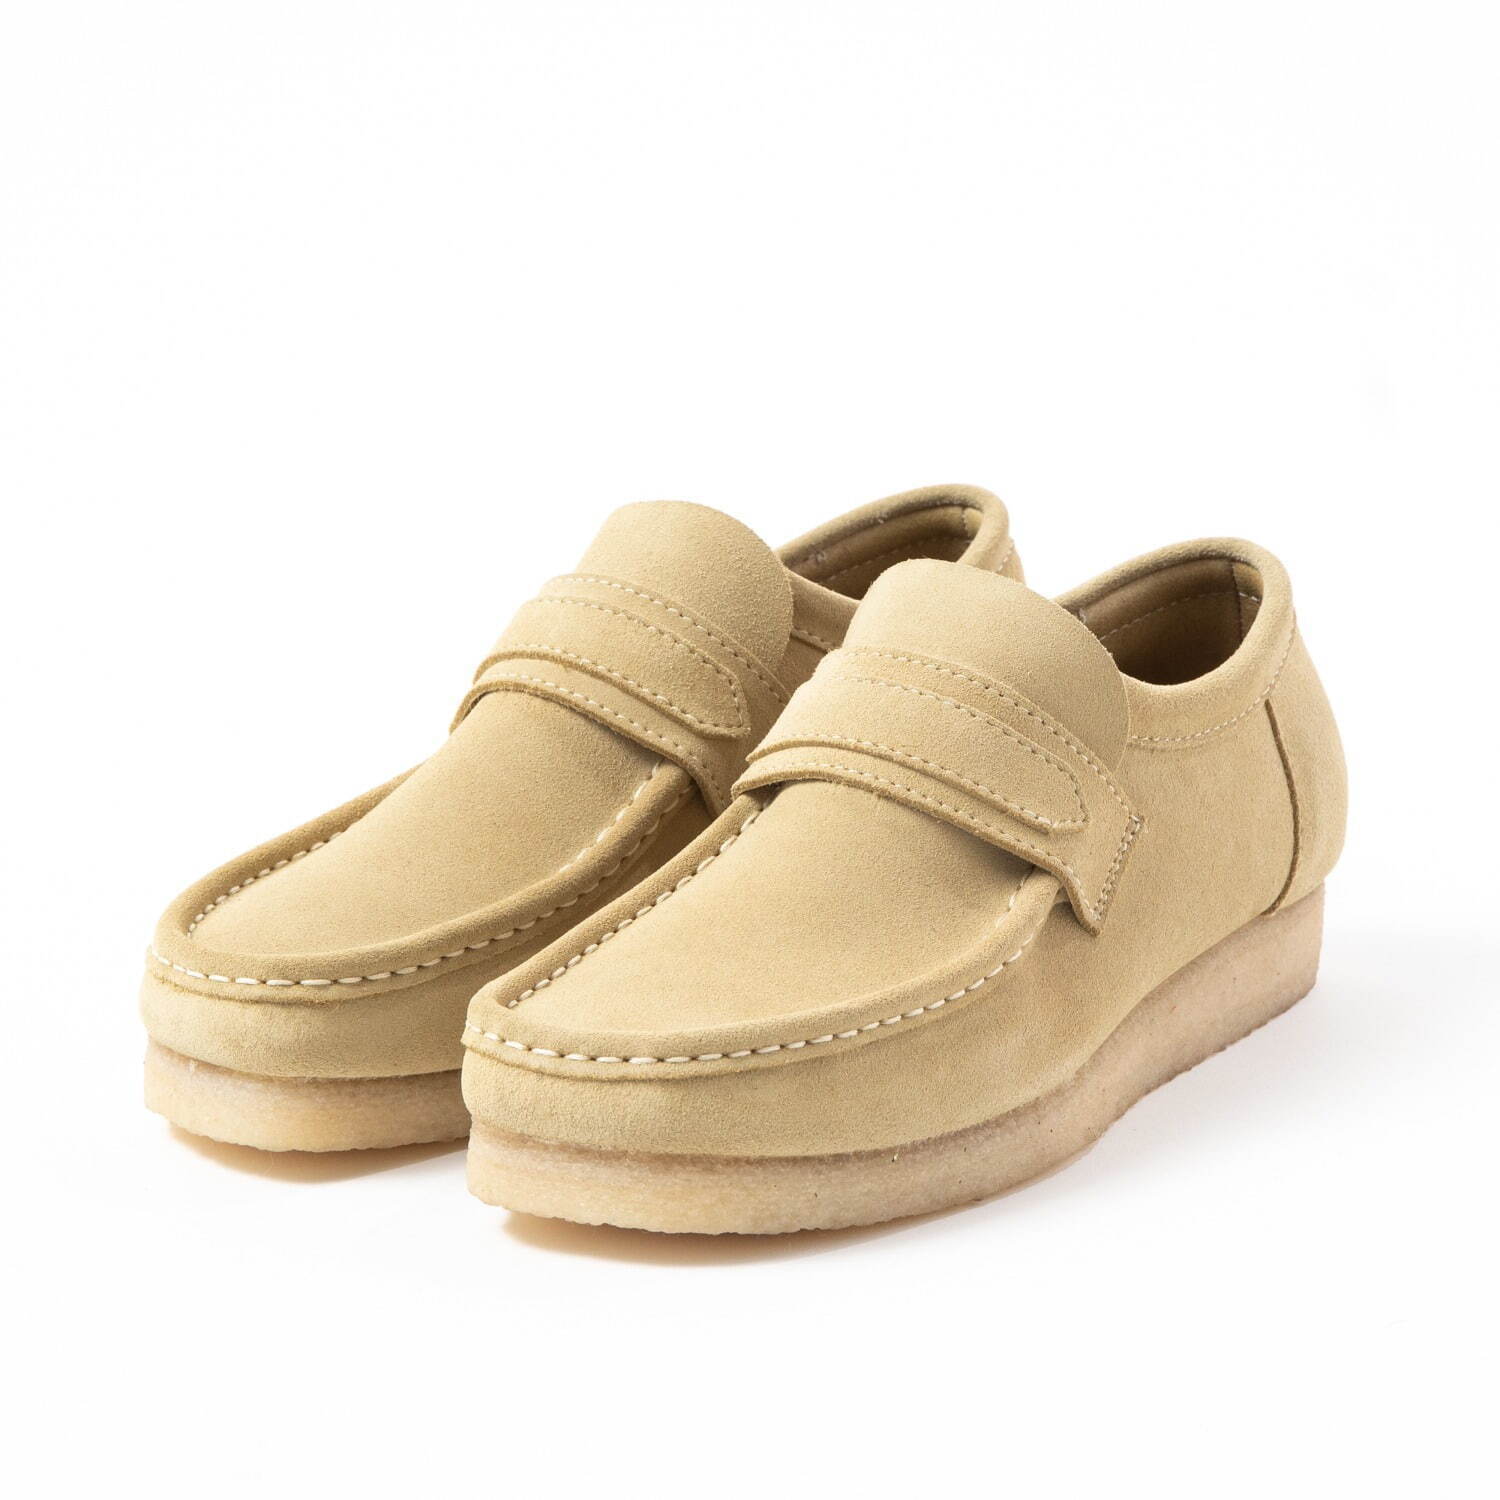 clarks-wallabee-loafer (3)